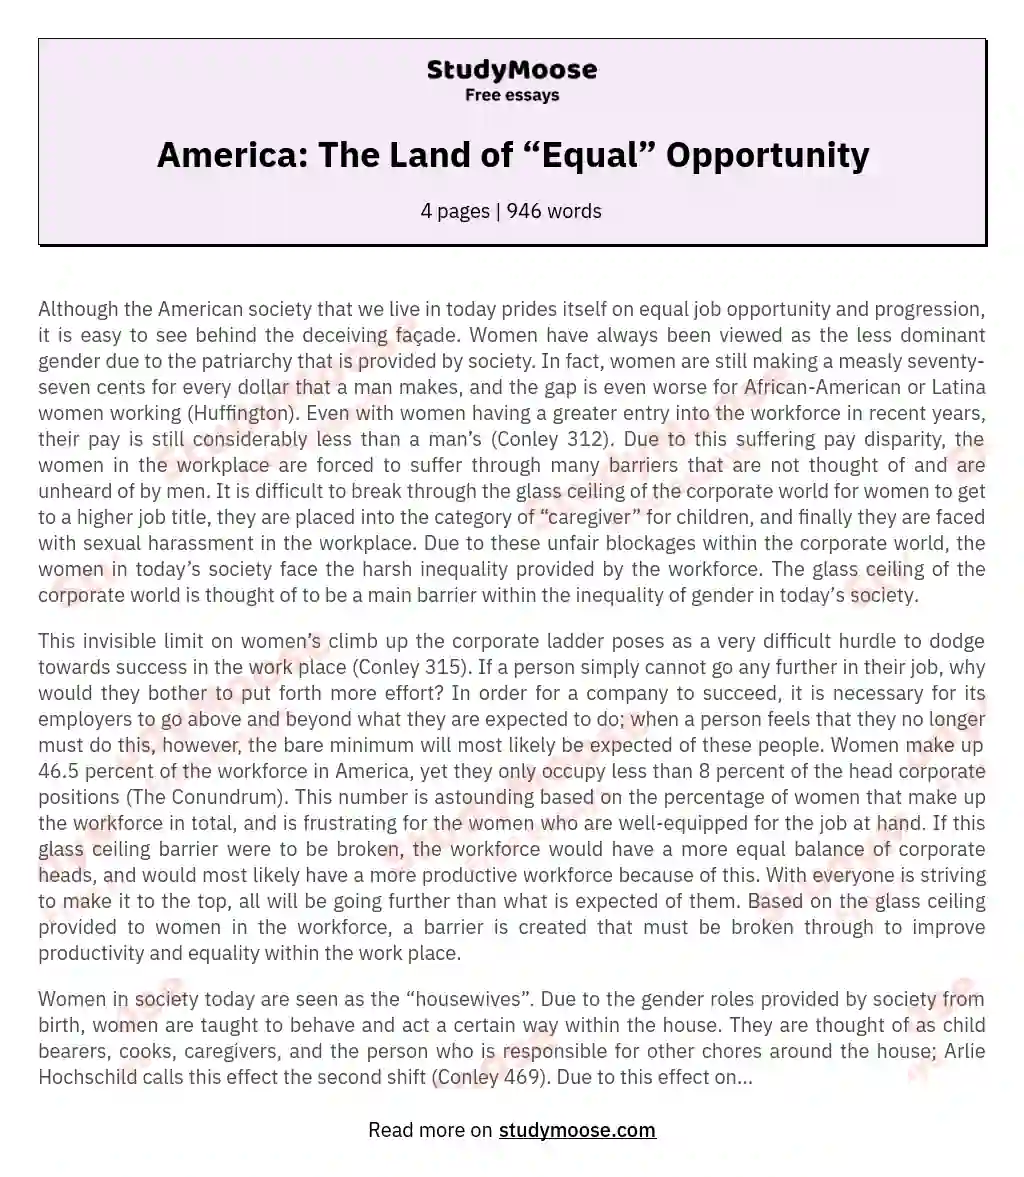 America: The Land of “Equal” Opportunity